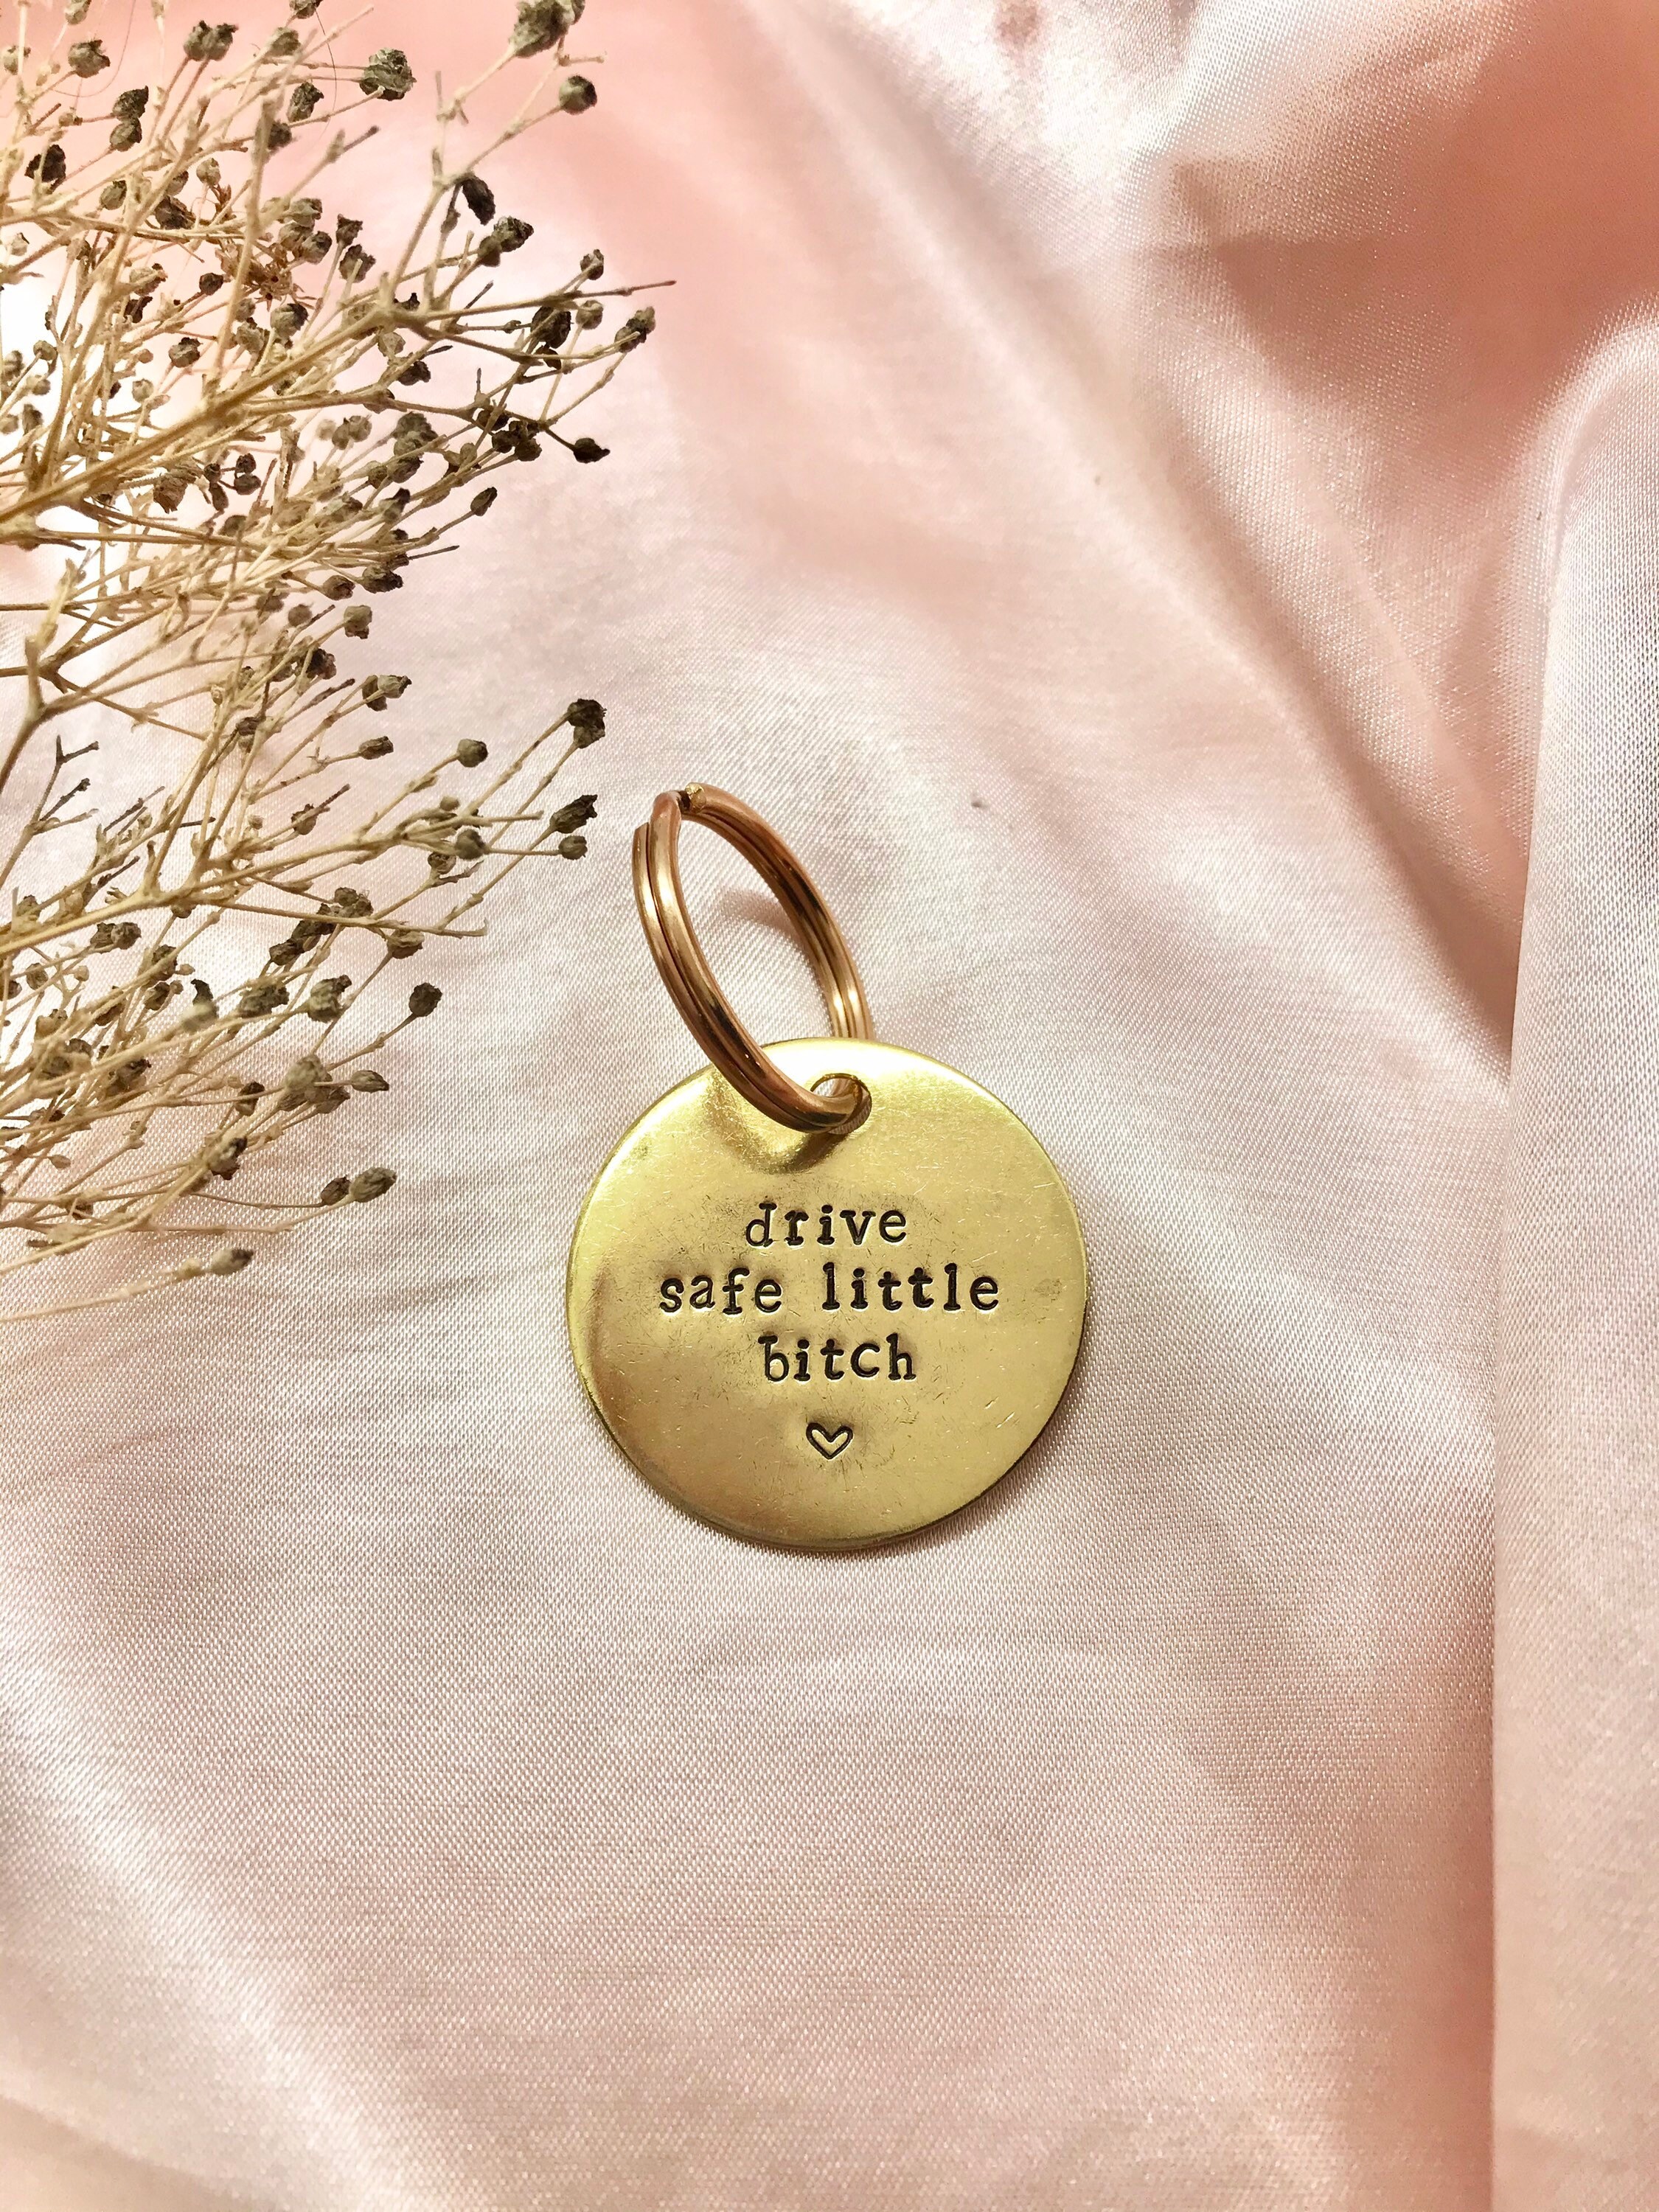 Official Bitch Of The Year Award Key Chain Keyring 